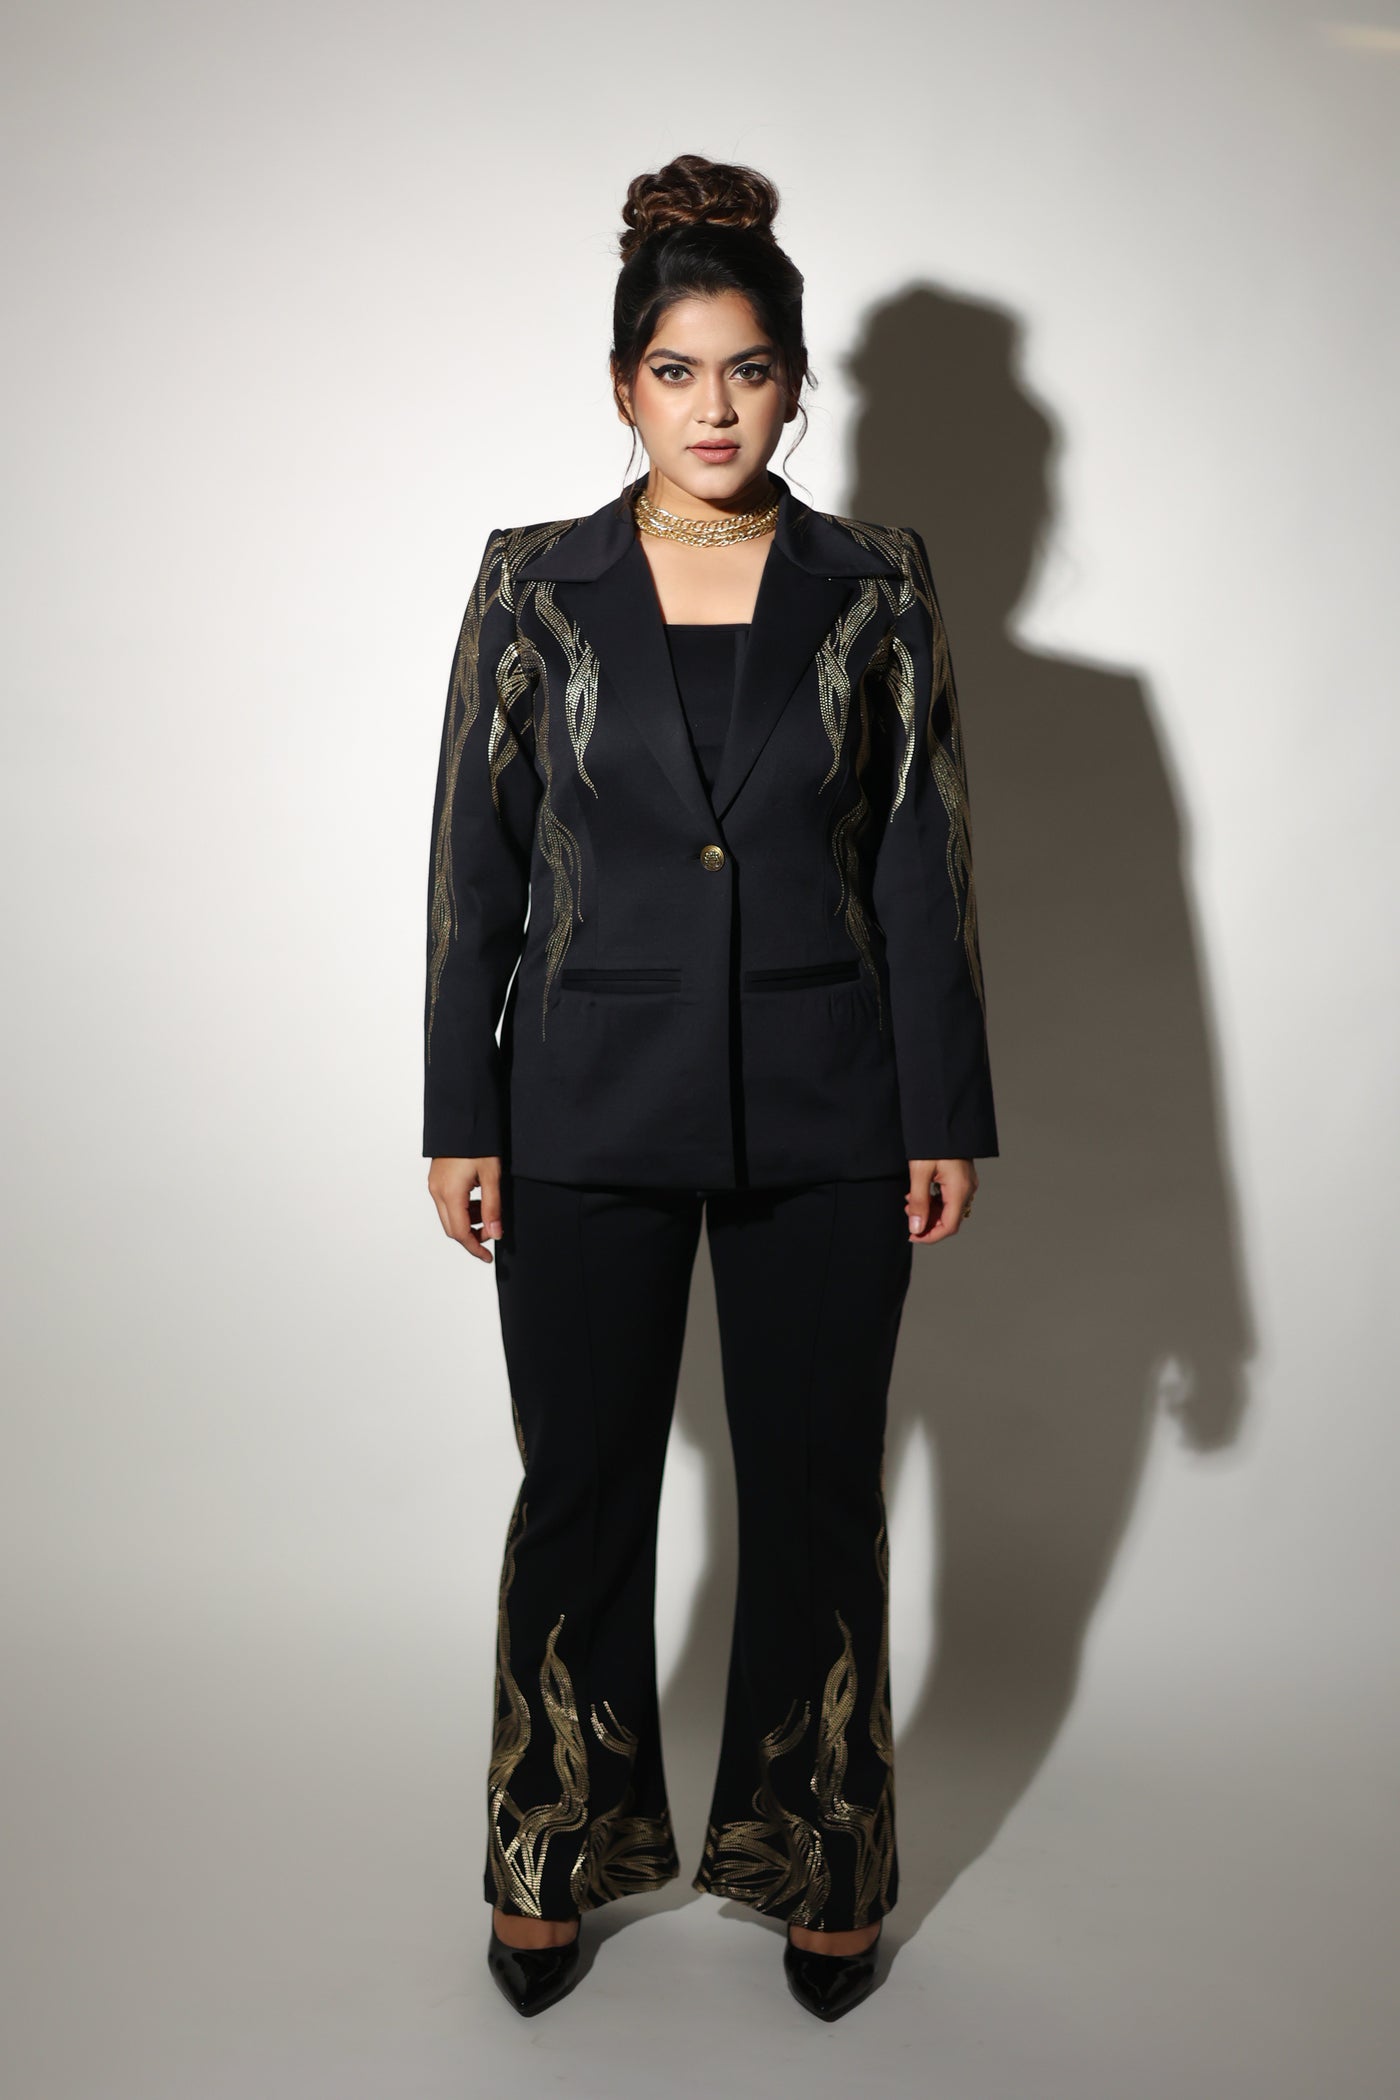 Out of Your League (PANT SUIT)